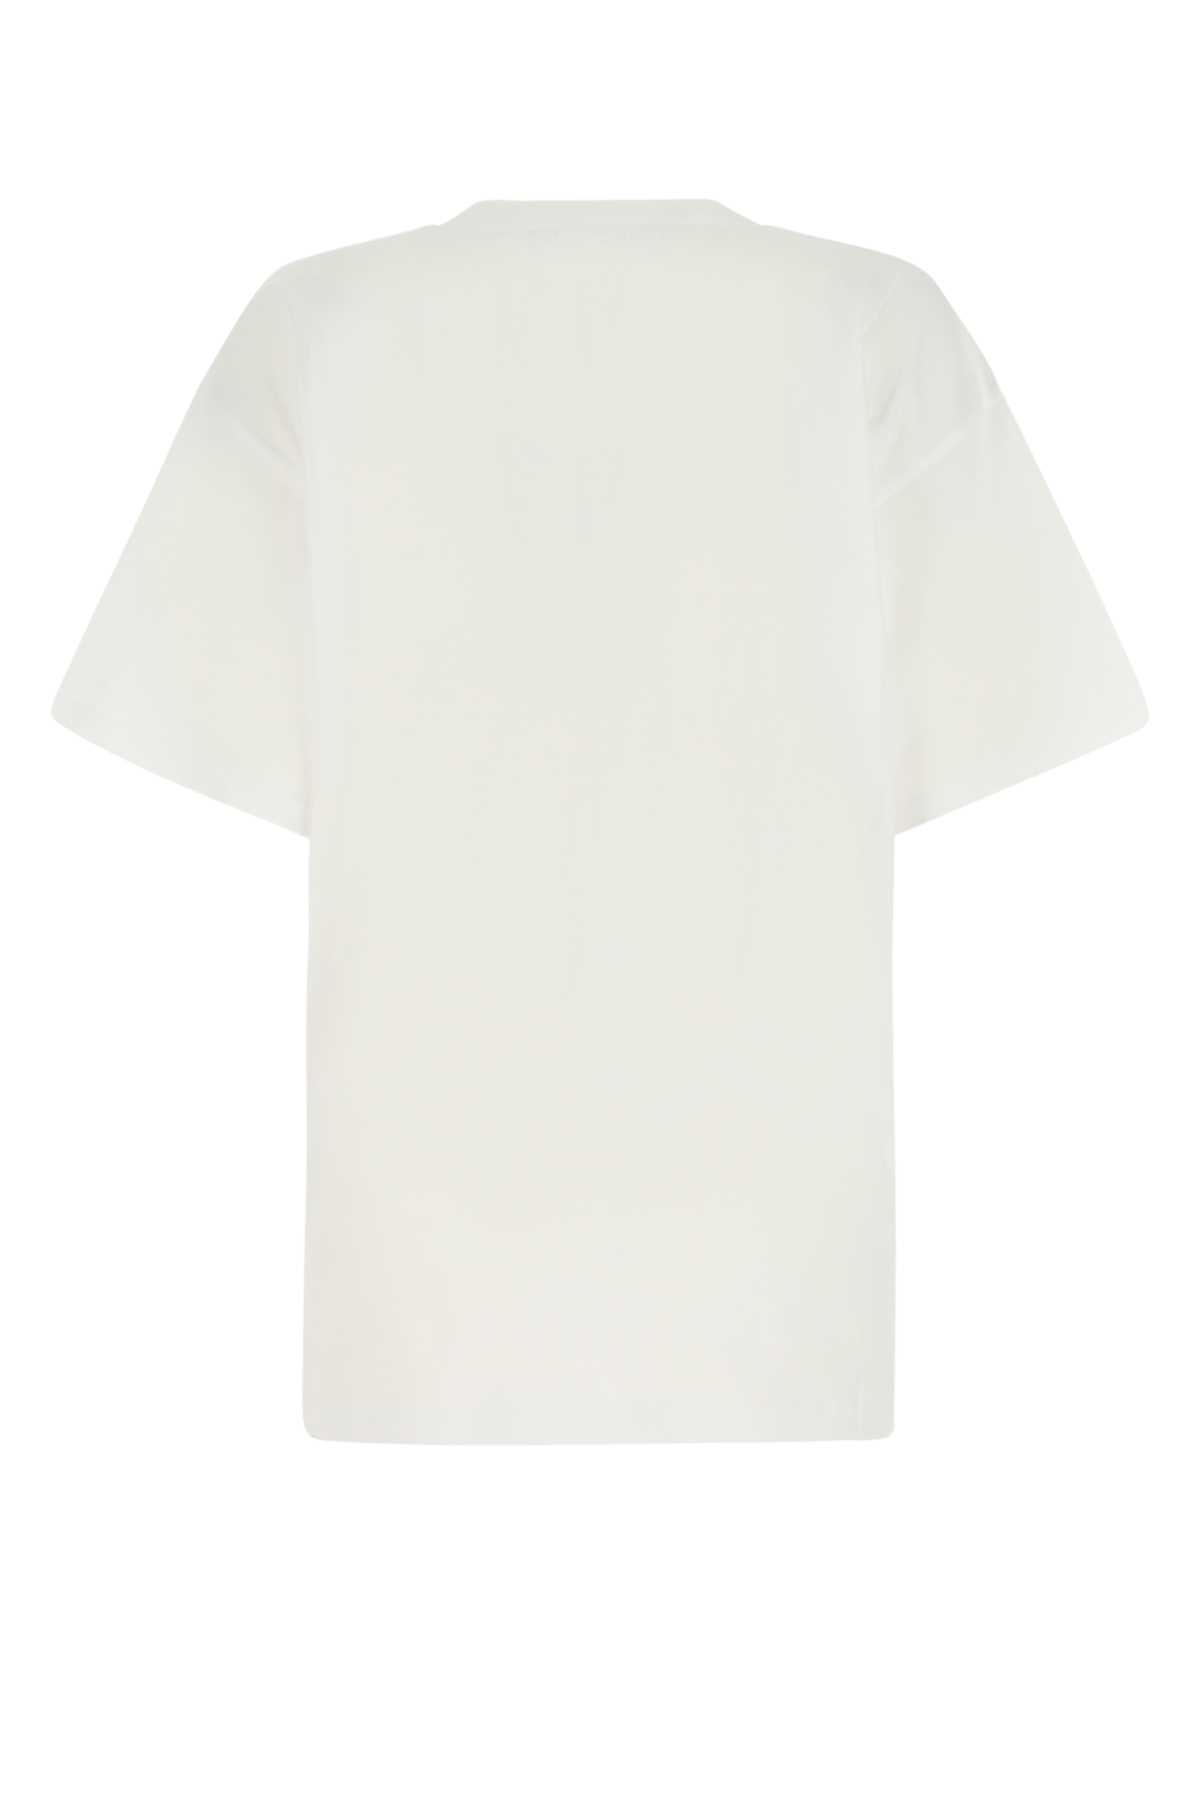 Moschino White Cotton Oversize T-shirt In A6001